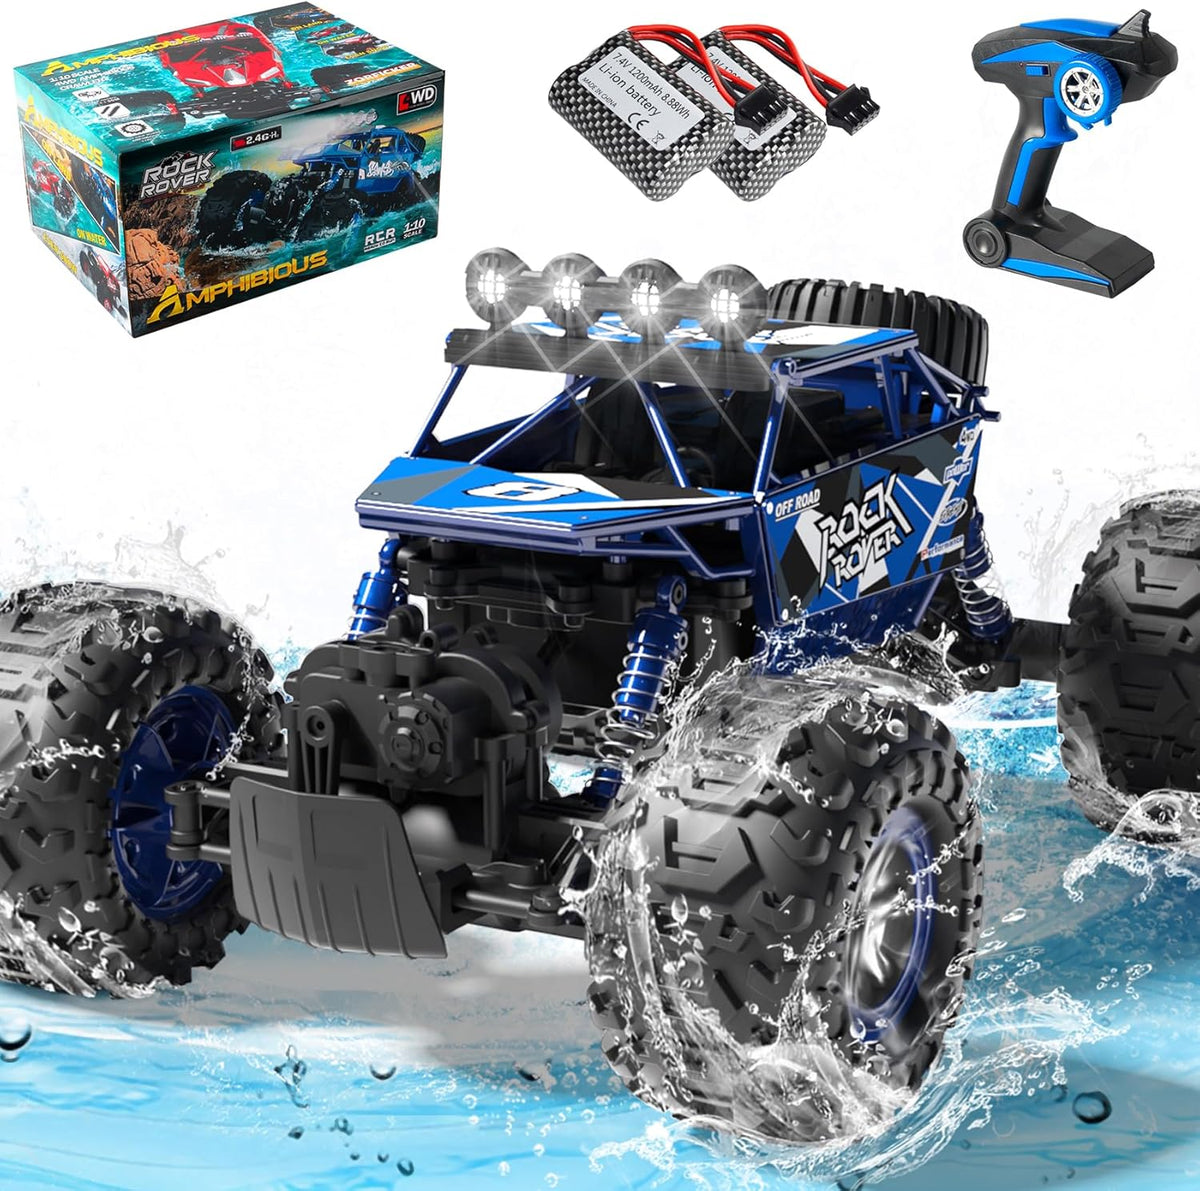 1:10 Big Amphibious RC Truck, IPX6 Waterproof 20 Km/h 4x4 Off-Road RC Rock Crawler, RC Monster Truck with Al alloy shell & LED Light, 2.4GHz All Terrain RC Cars with 2 Batteries 100Mins Play (Blue)